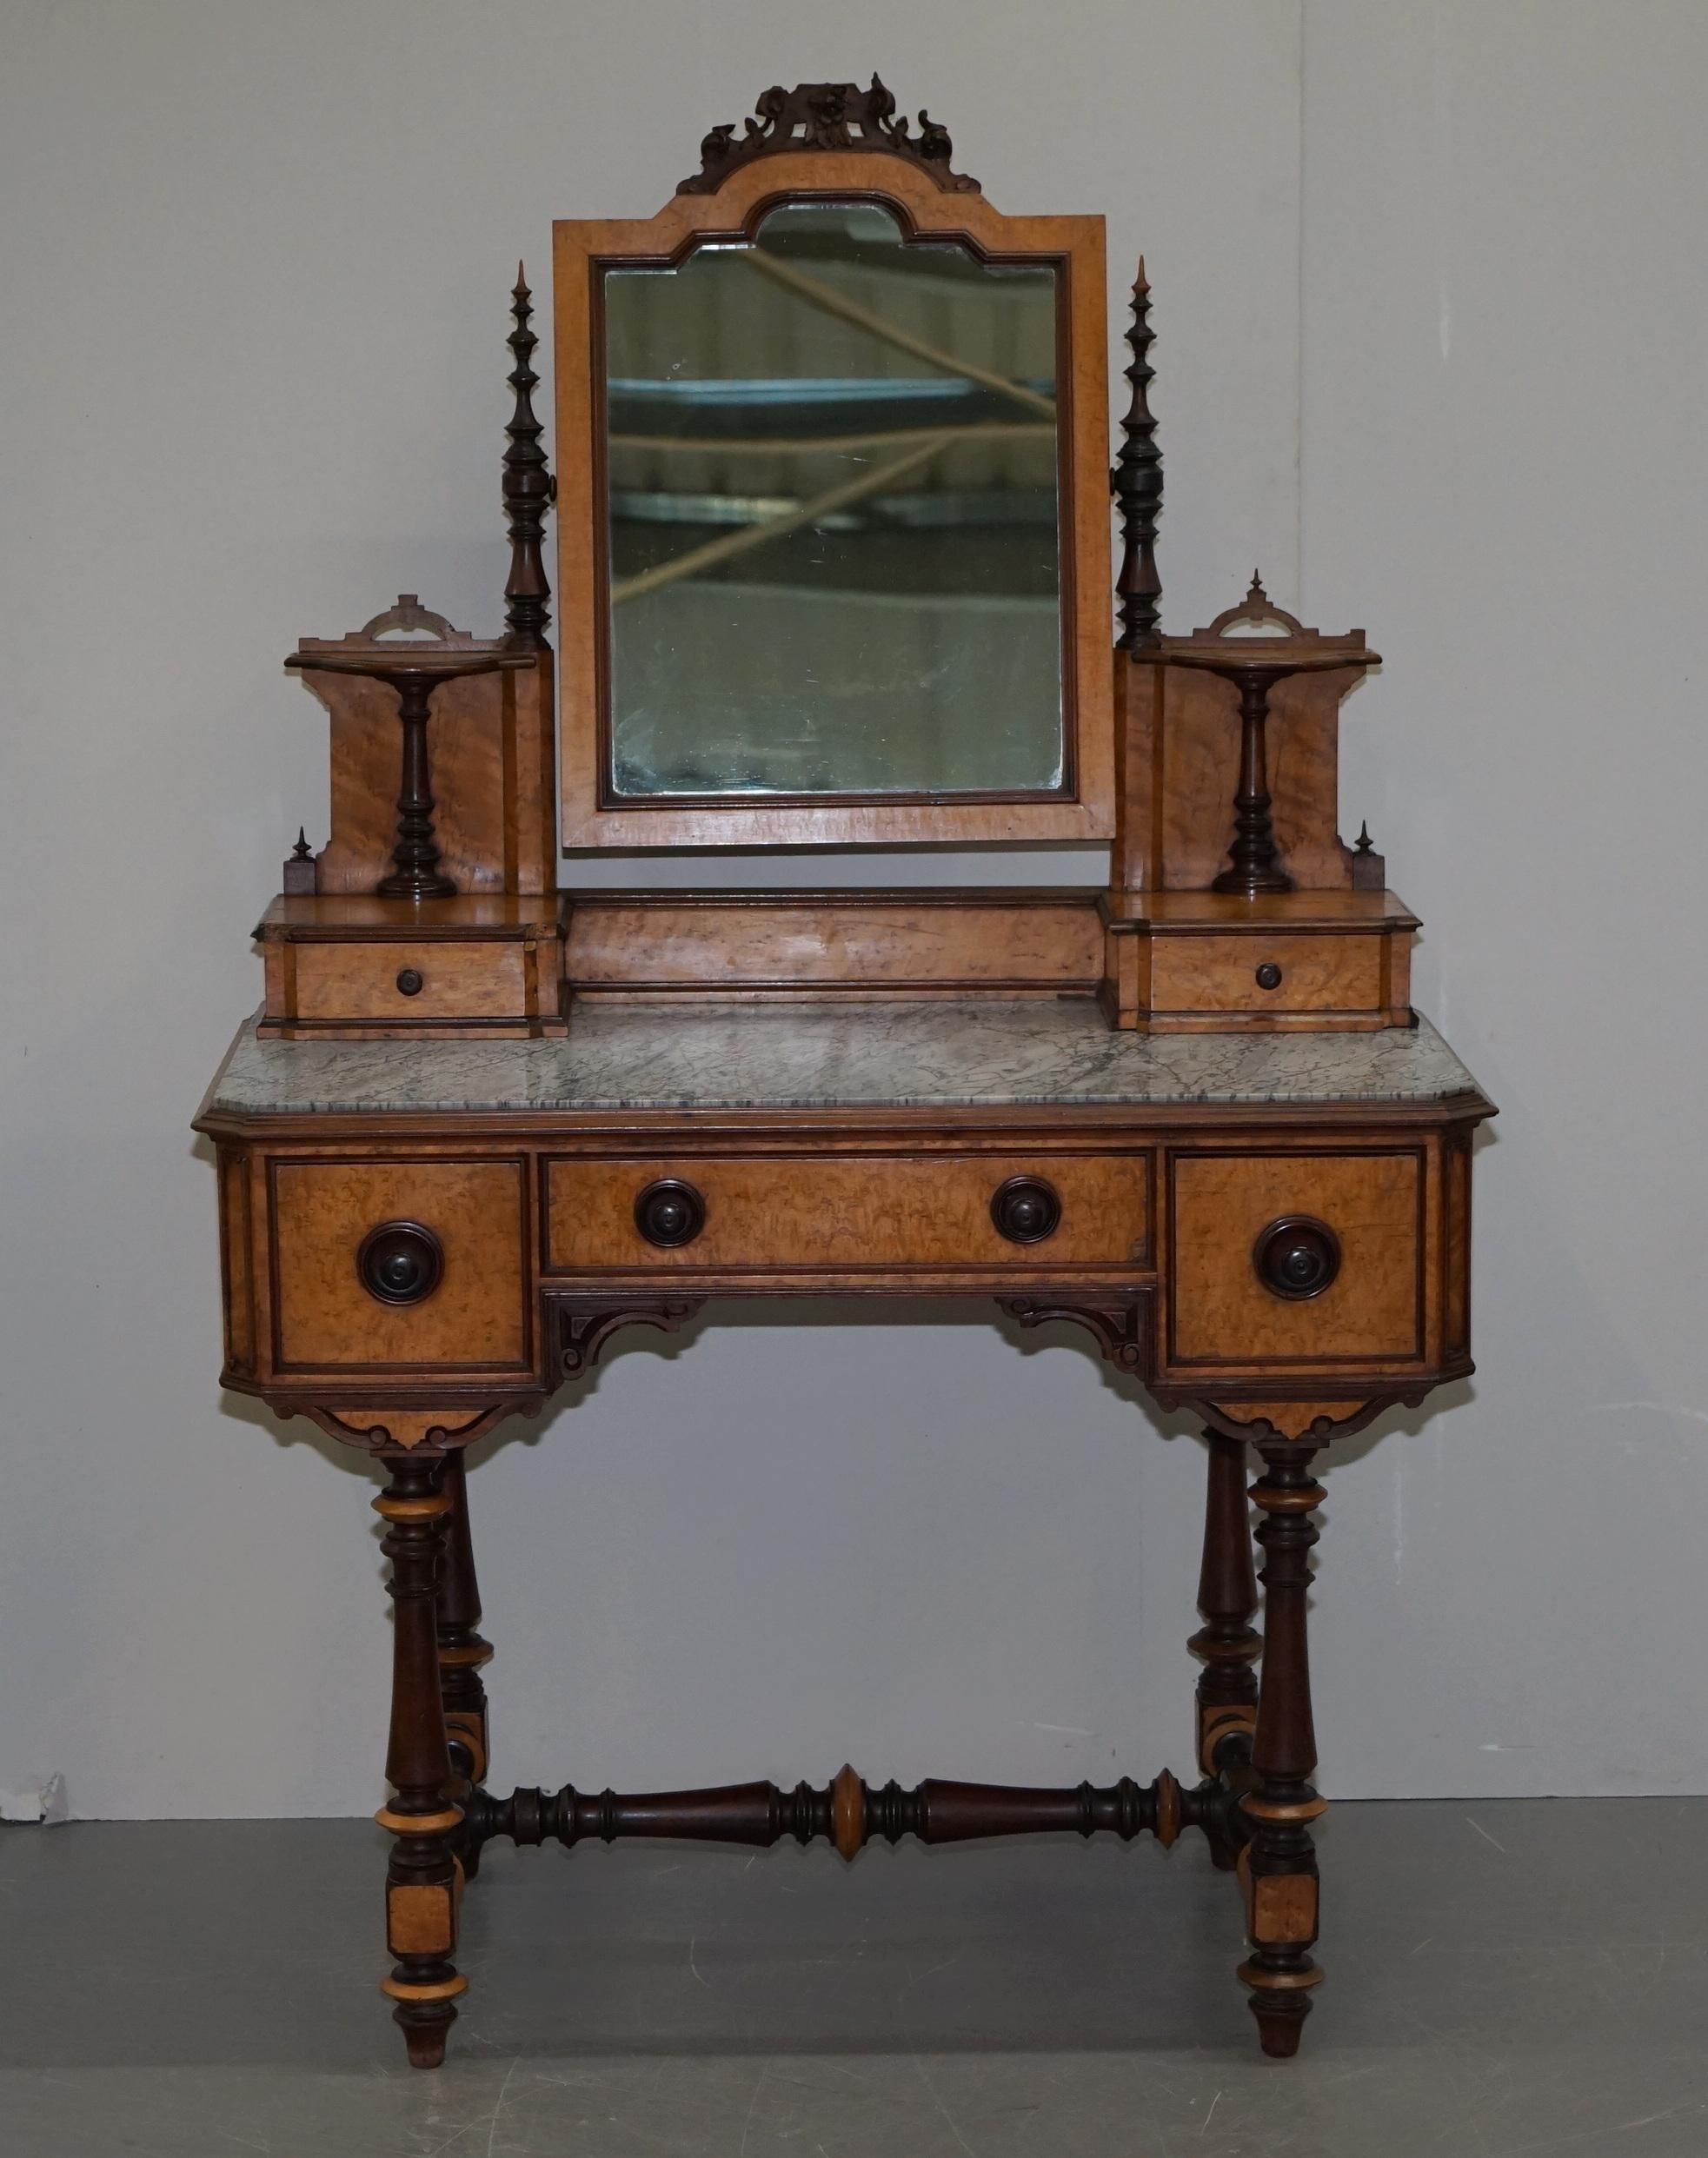 We are delighted to offer for sale this sublime 19th century Victorian continental burr satinwood dressing table with Italian marble top

A quintessentially Classic piece, it feels eastern European, most likely Venetian, the frame is exquisite